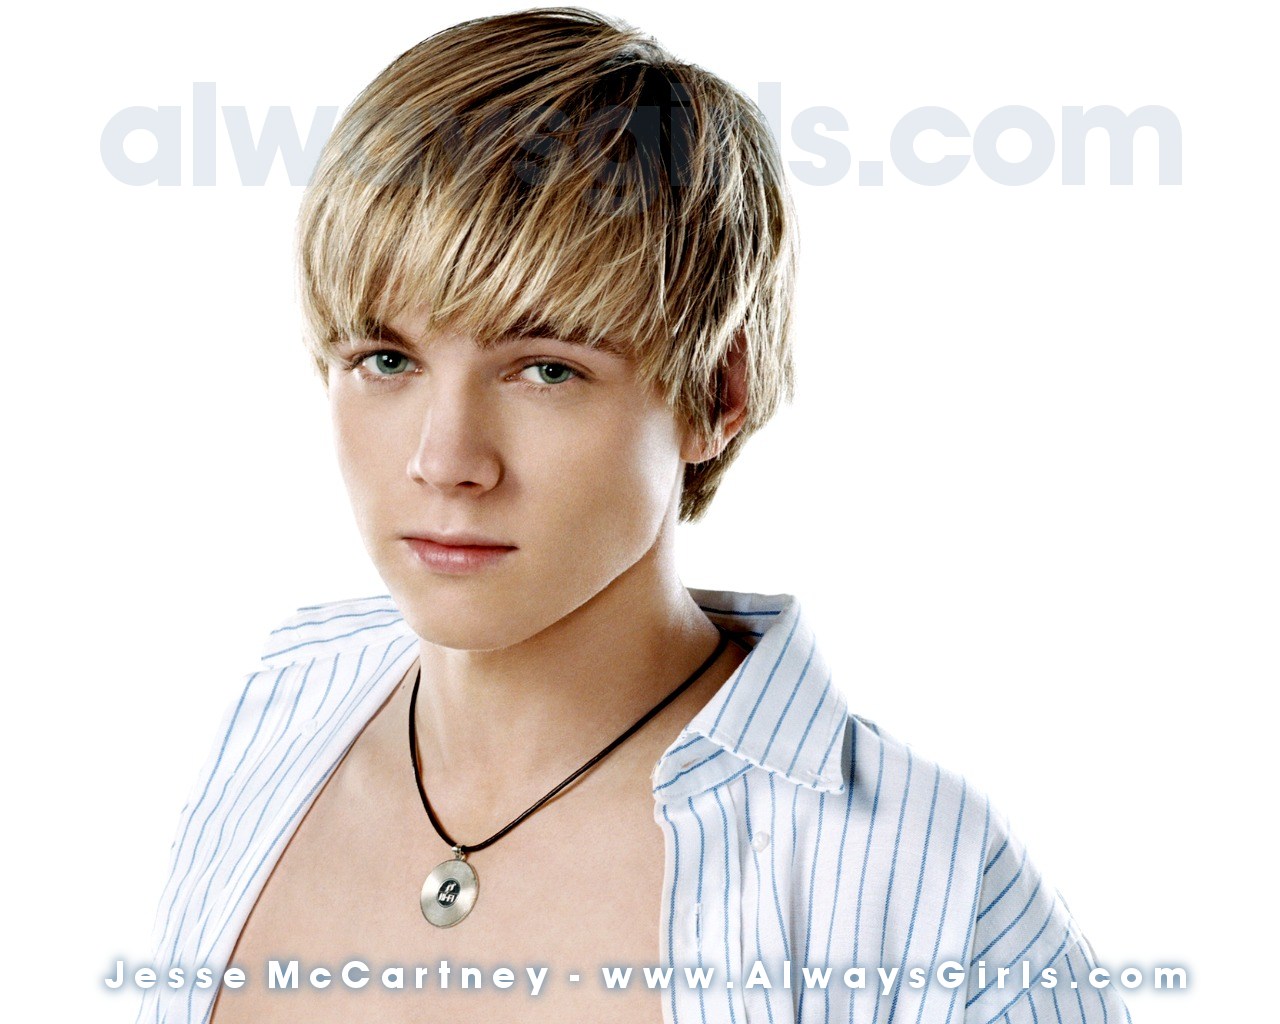 Jesse McCartney Wallpaper - Right click your mouse and choose "Set As Background" to